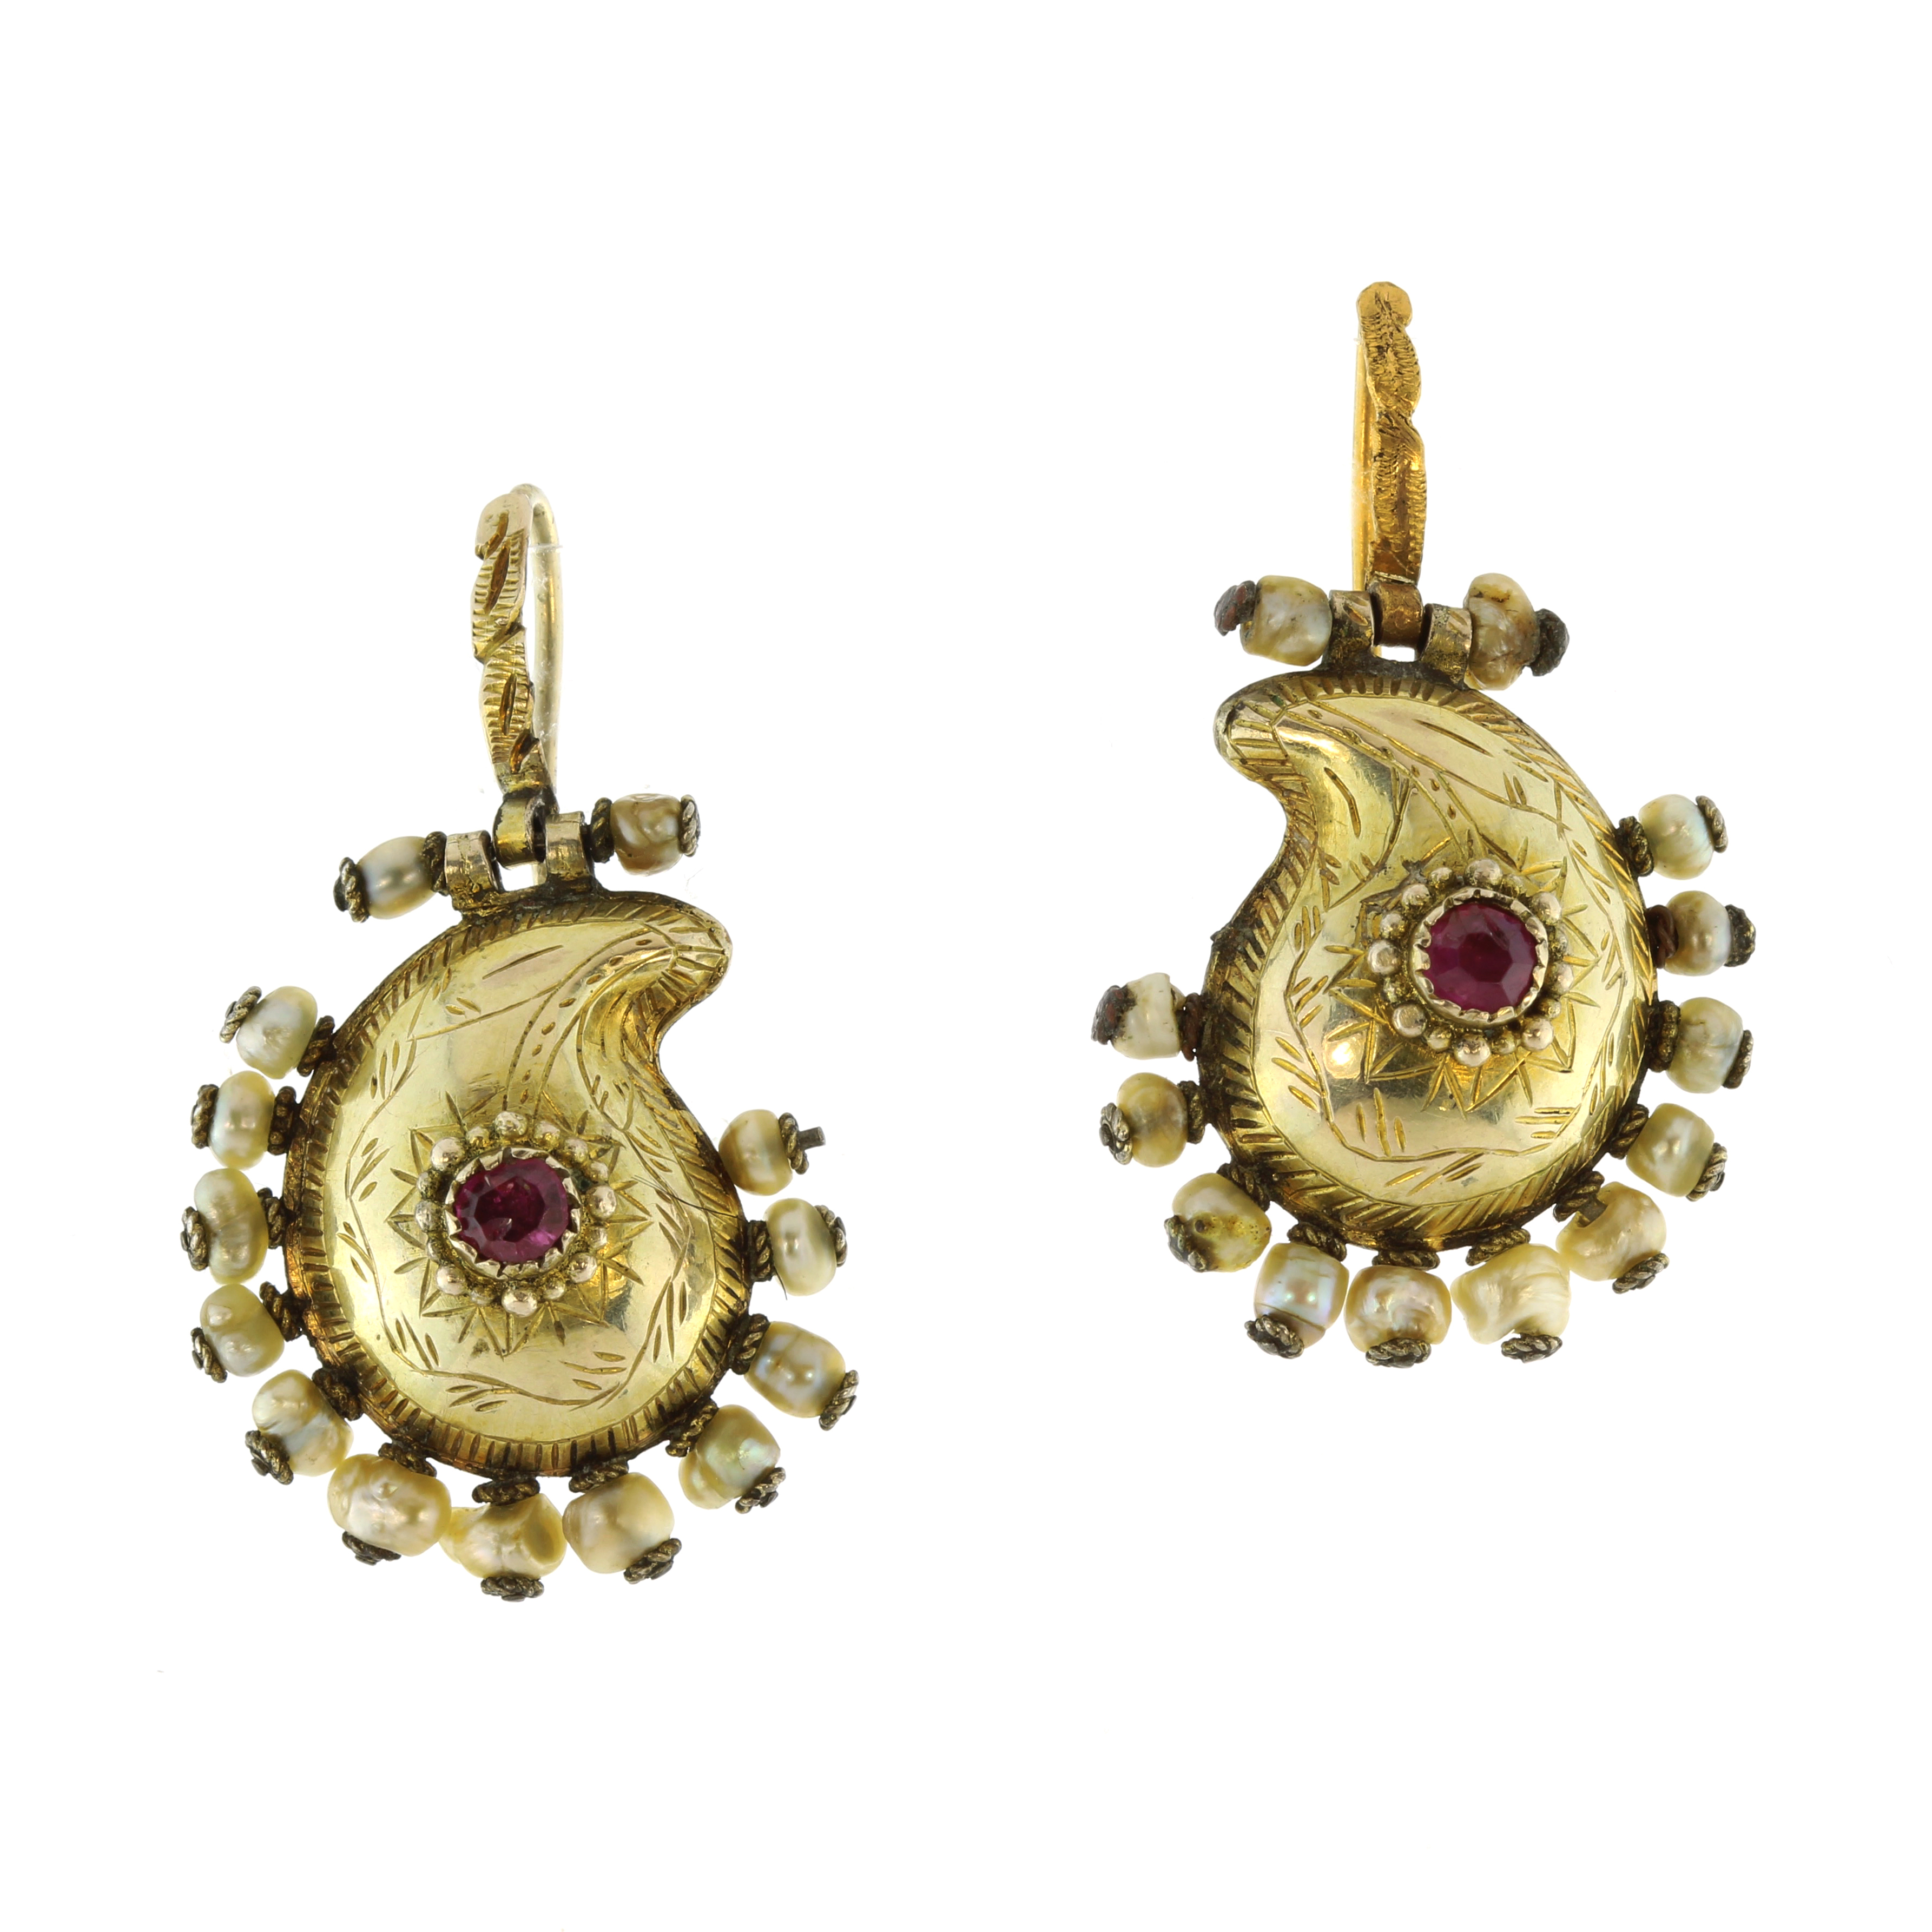 A pair of ruby and pearl earrings in high carat yellow gold each designed as a kidney shaped motif